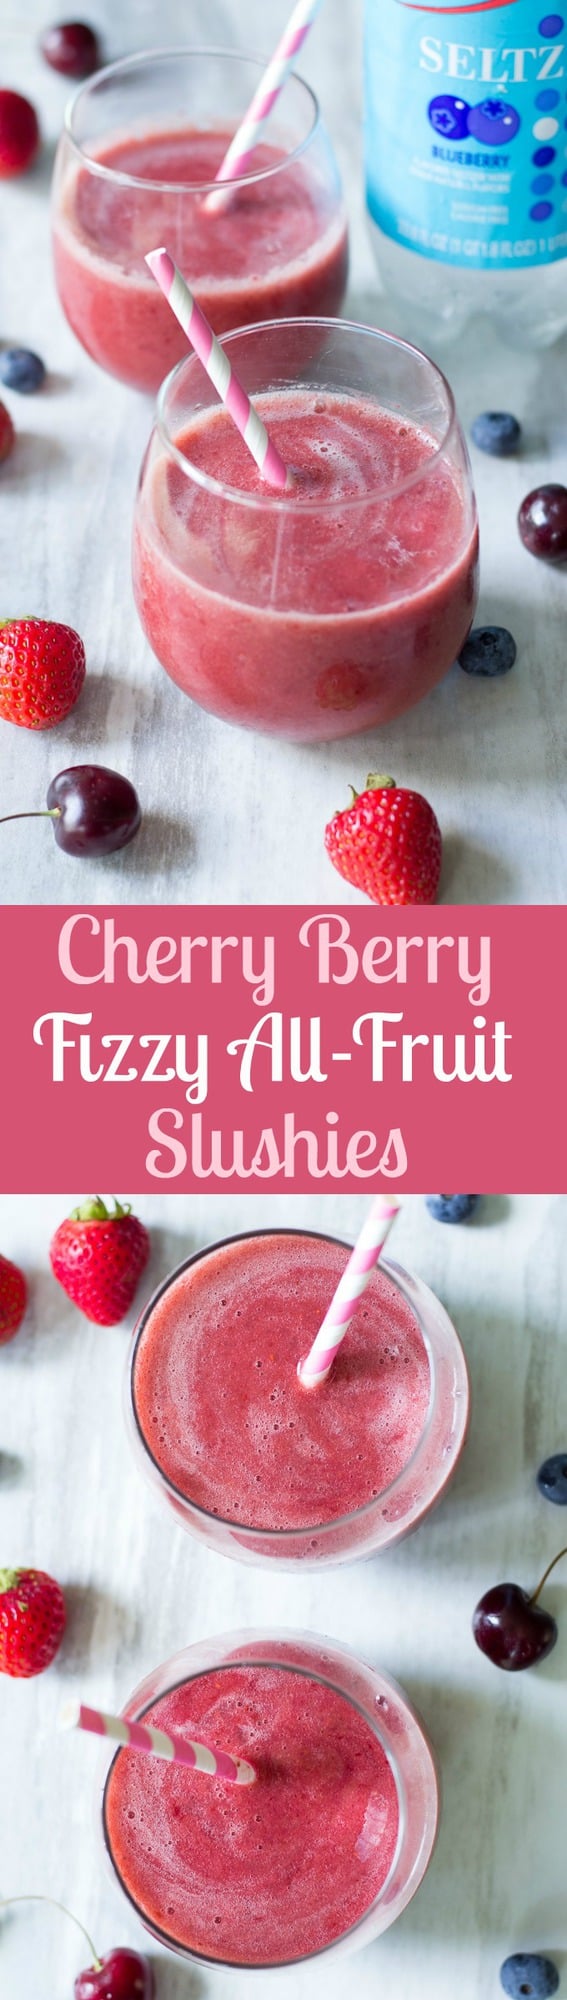 Cherry Berry Fizzy All-Fruit Slushies made with frozen fruit and blueberry flavored Seltzer